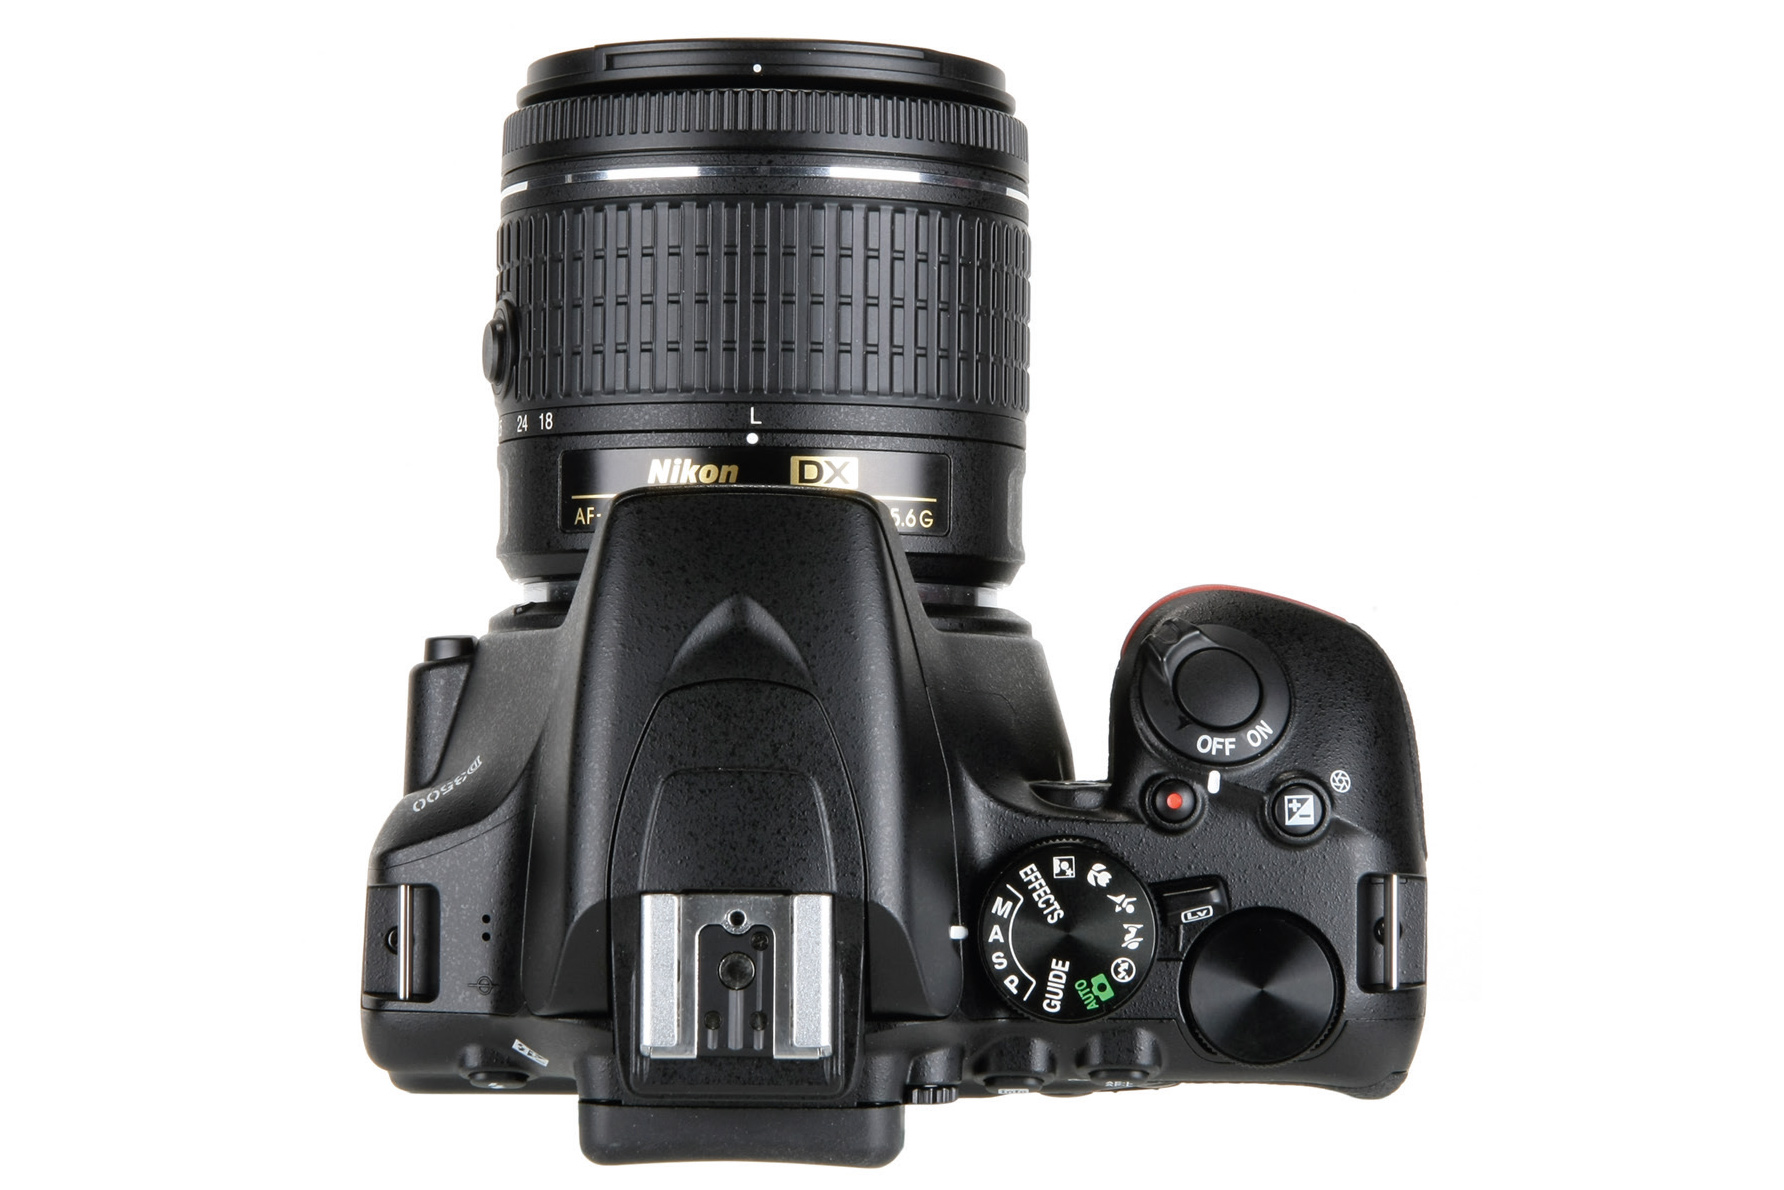 Nikon D3500 from the top, with lens